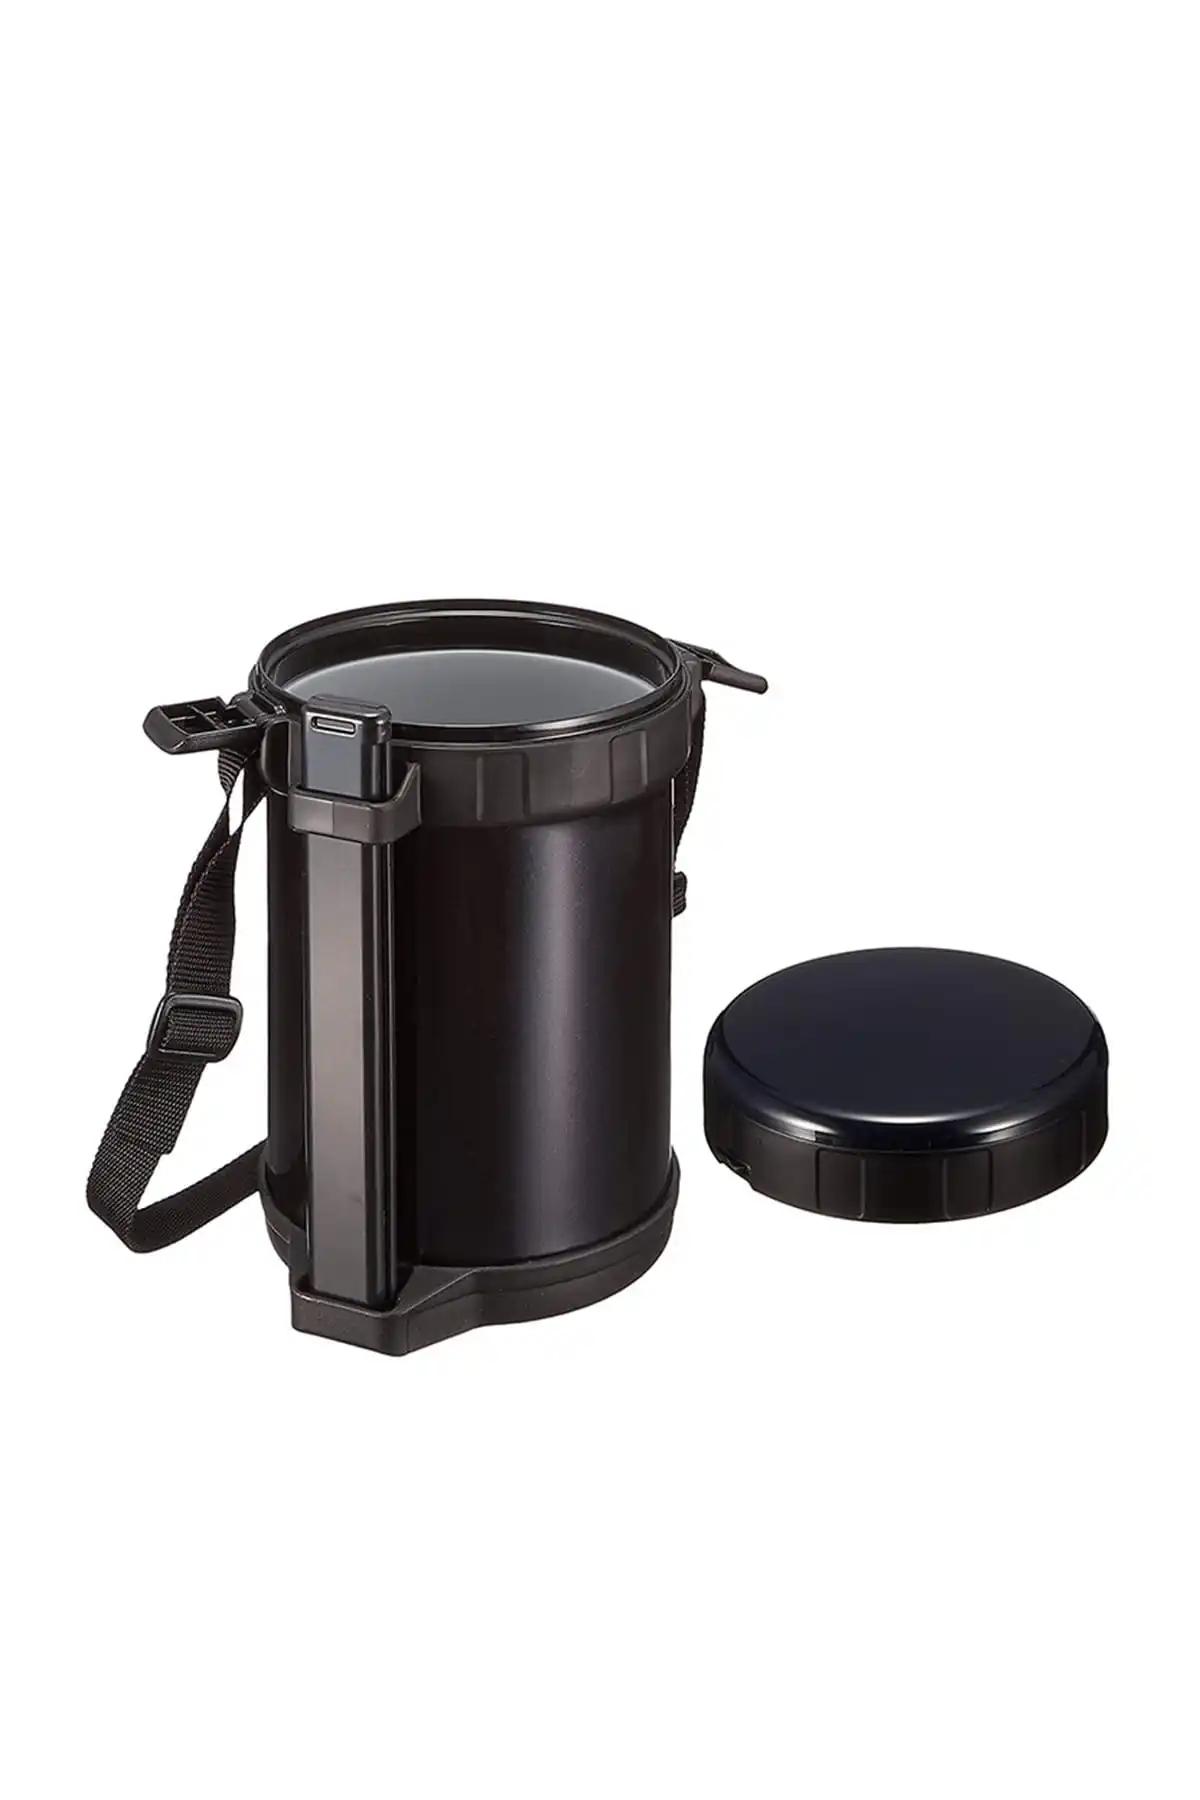 https://ae01.alicdn.com/kf/H60db91bf4bf14339a04b3d5e8eb54a34M/Zojirushi-Eat-Thermos-Storage-Container-Lunch-box-1-47L-hot-food-saver-storage-container-keeps-the.jpg